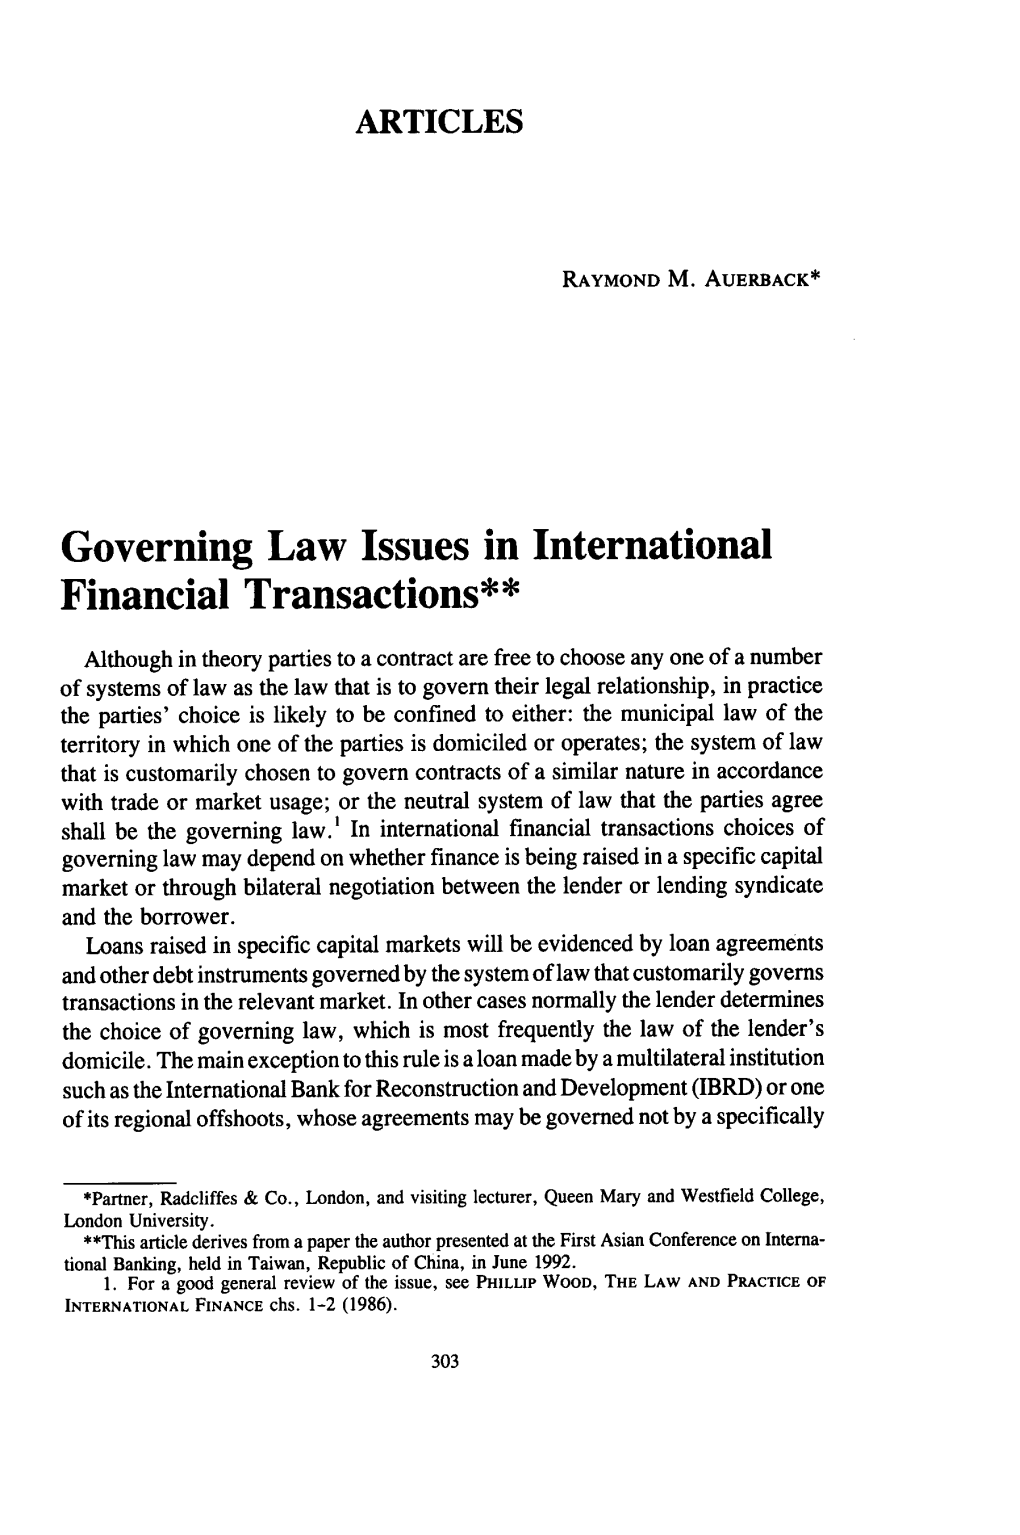 Governing Law Issues in International Financial Transactions**